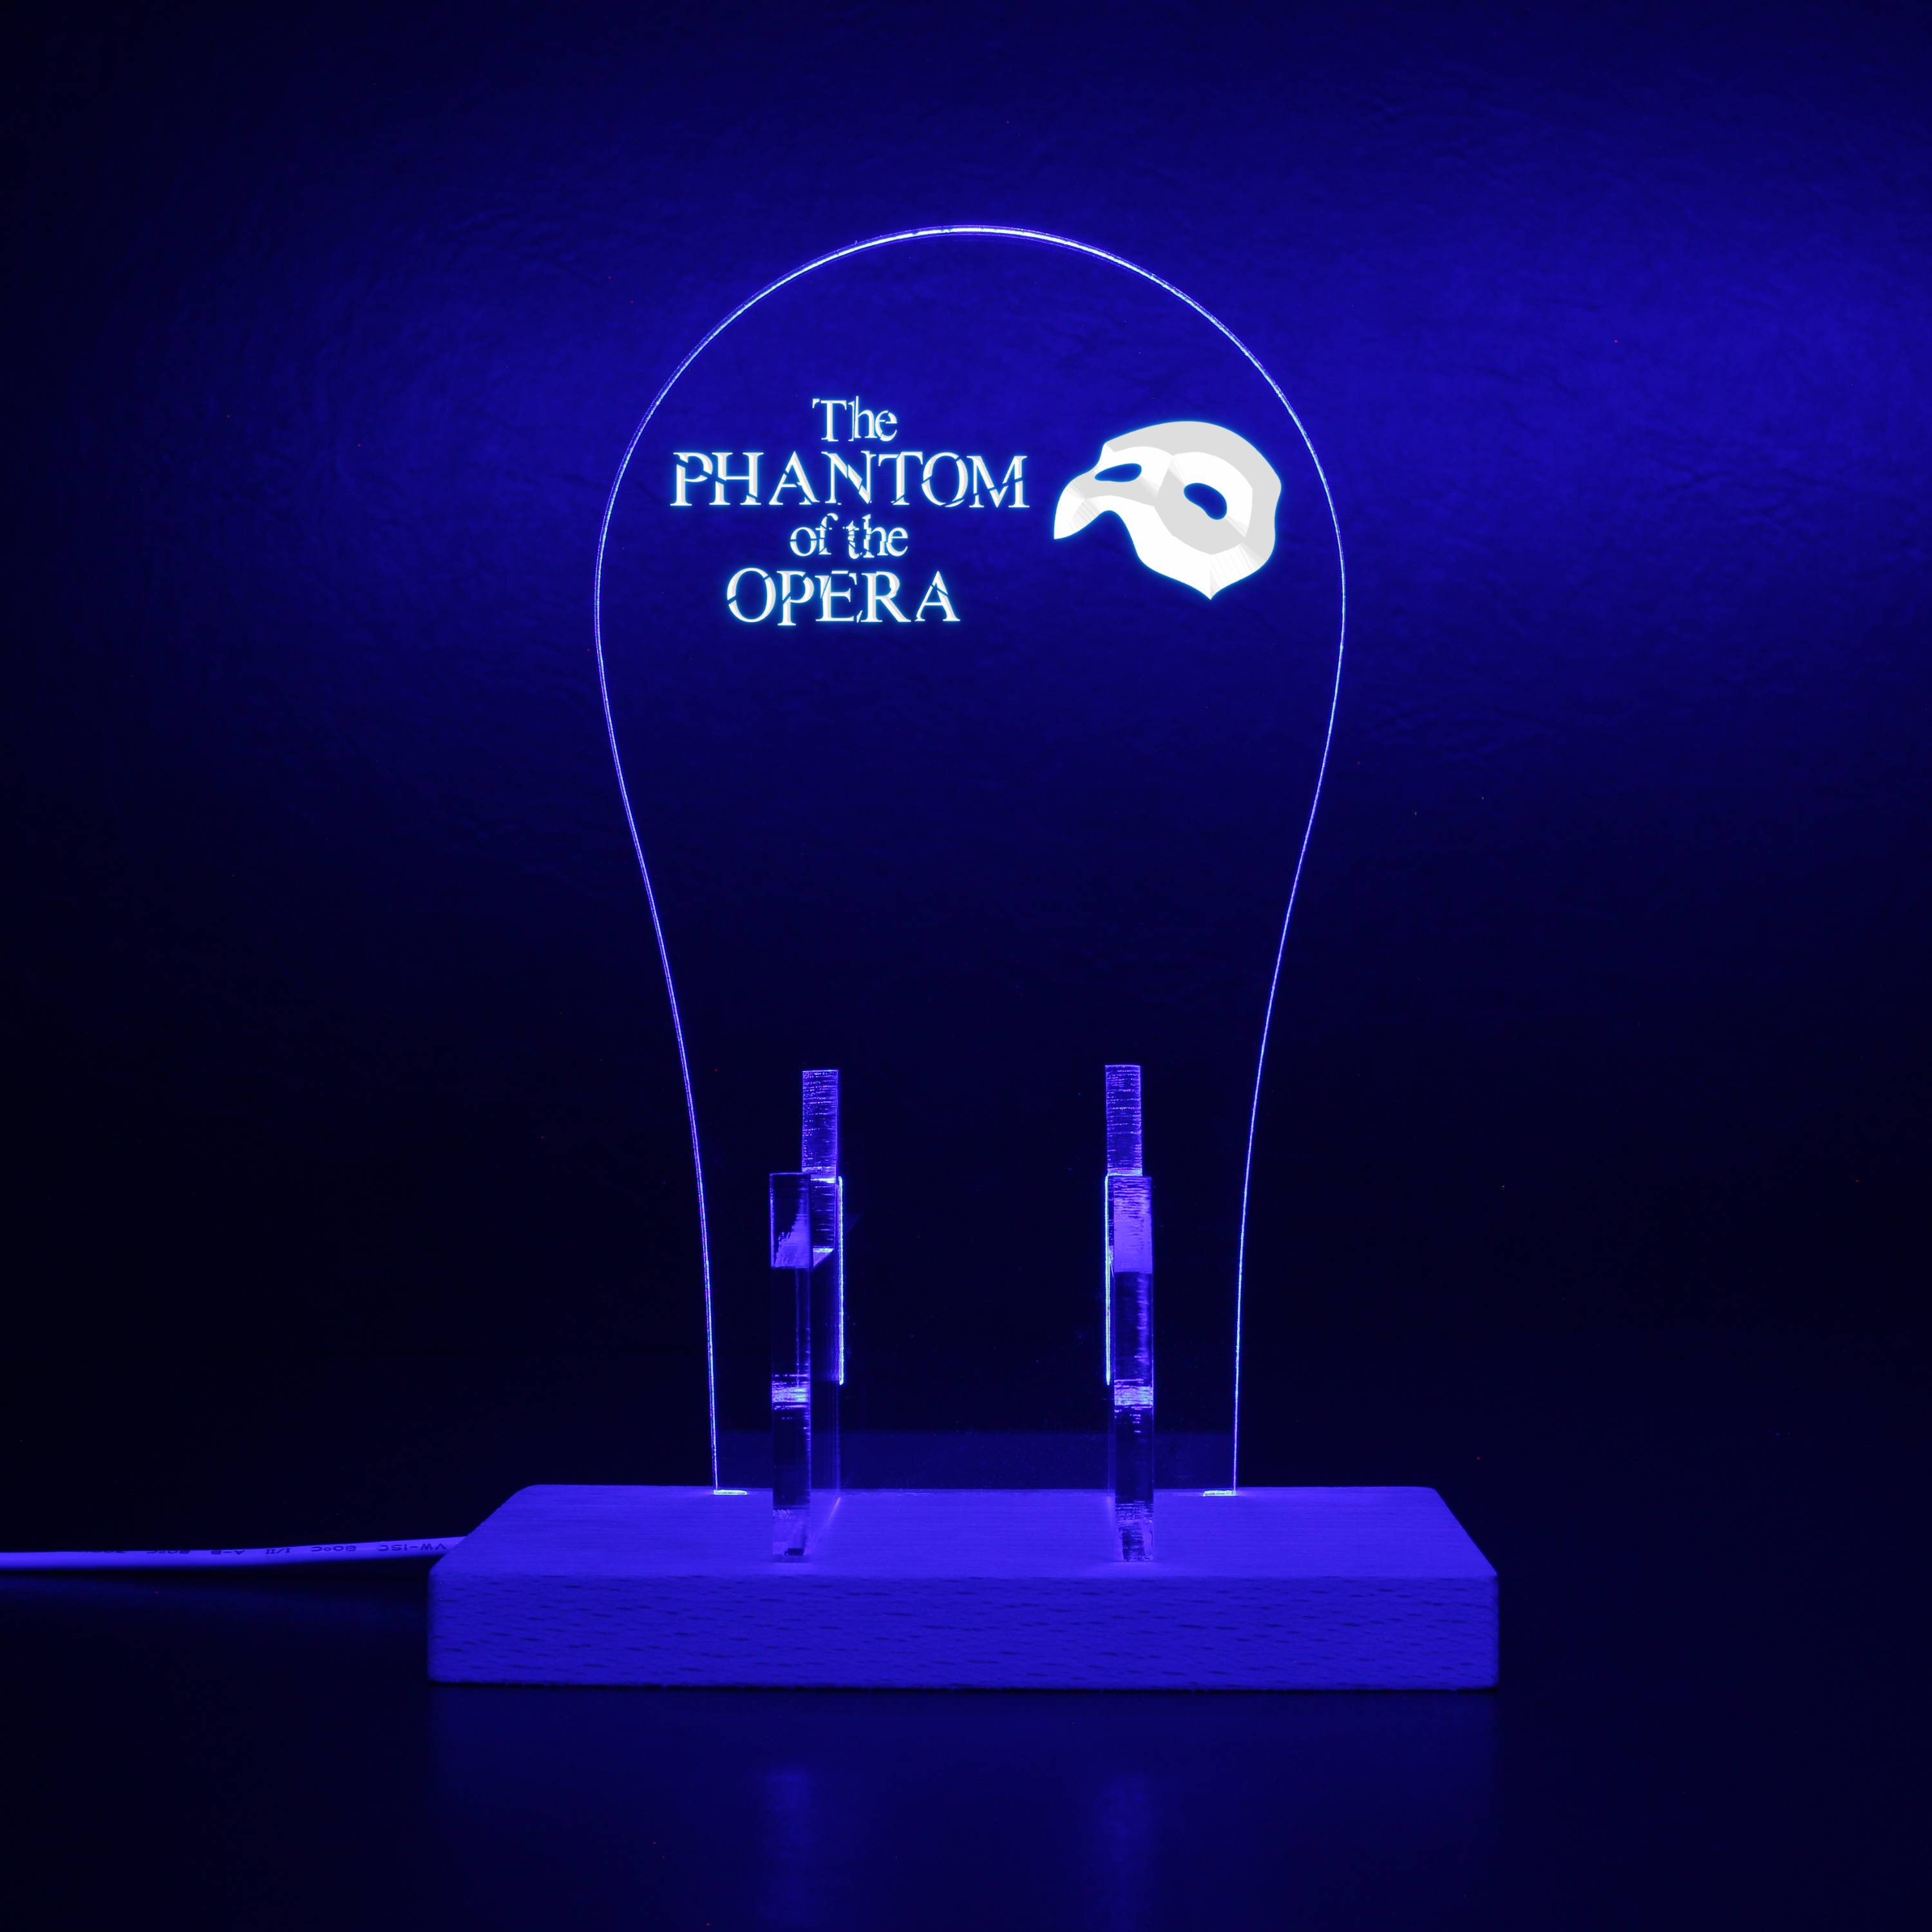 Phantom Movie LED Gaming Headset Controller Stand